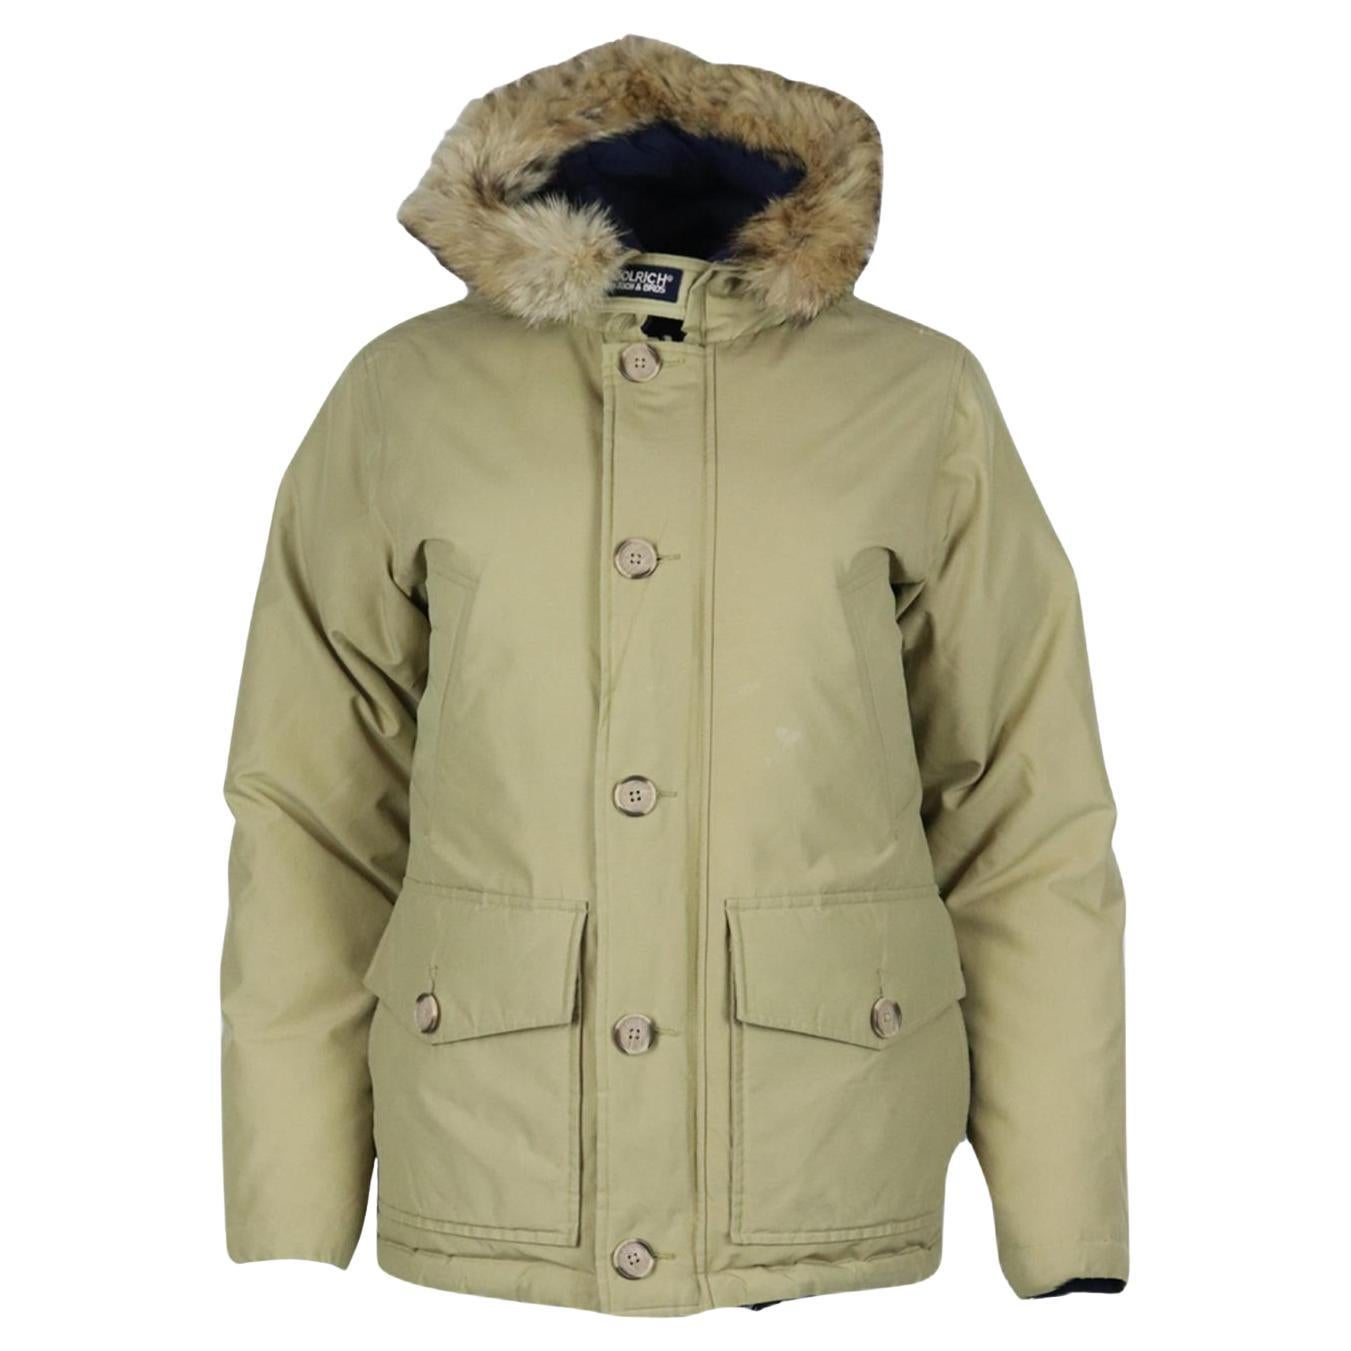 Coyote Jacket - 10 For Sale on 1stDibs | coyote jackets, belstaff